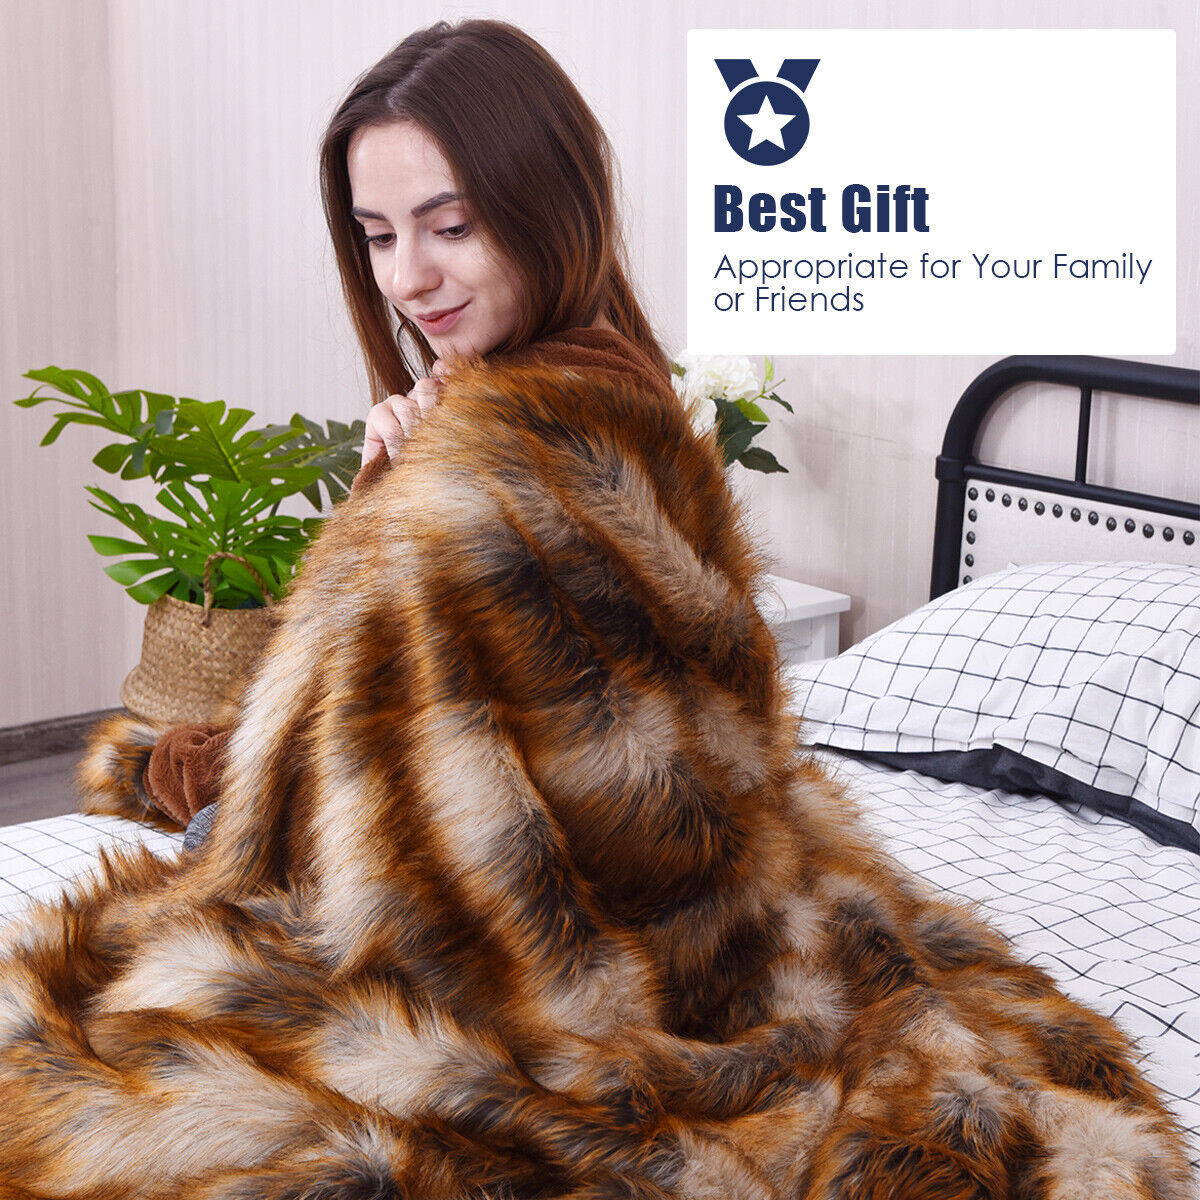 Throw Blanket -84 by 58 Inches Soft  Faux Fur Blanket